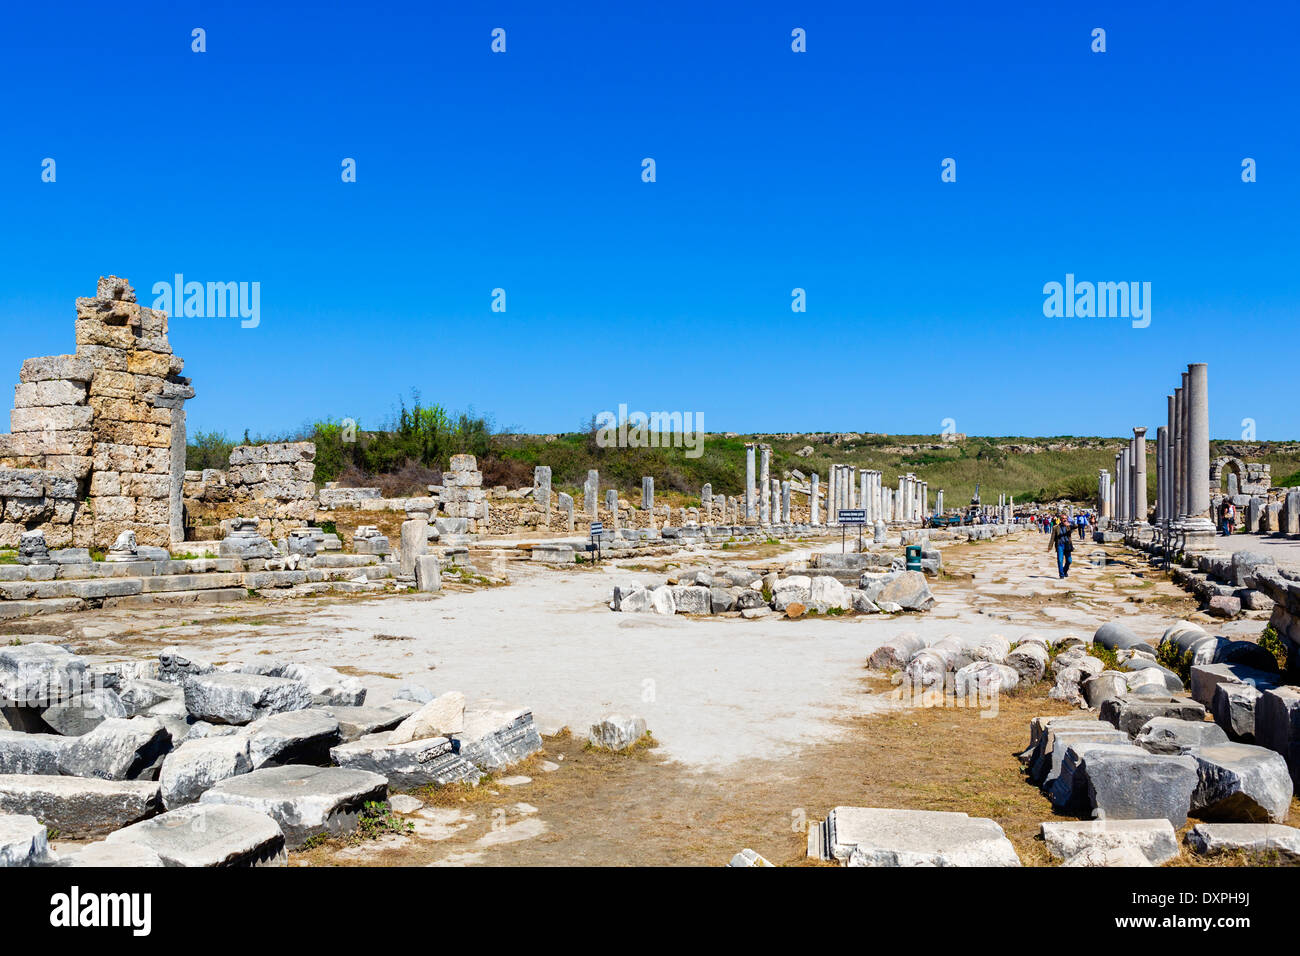 The Colonnaded street in the ruins of the ancient city of Perge, Pamphylia, Antalya Province, Turkey Stock Photo